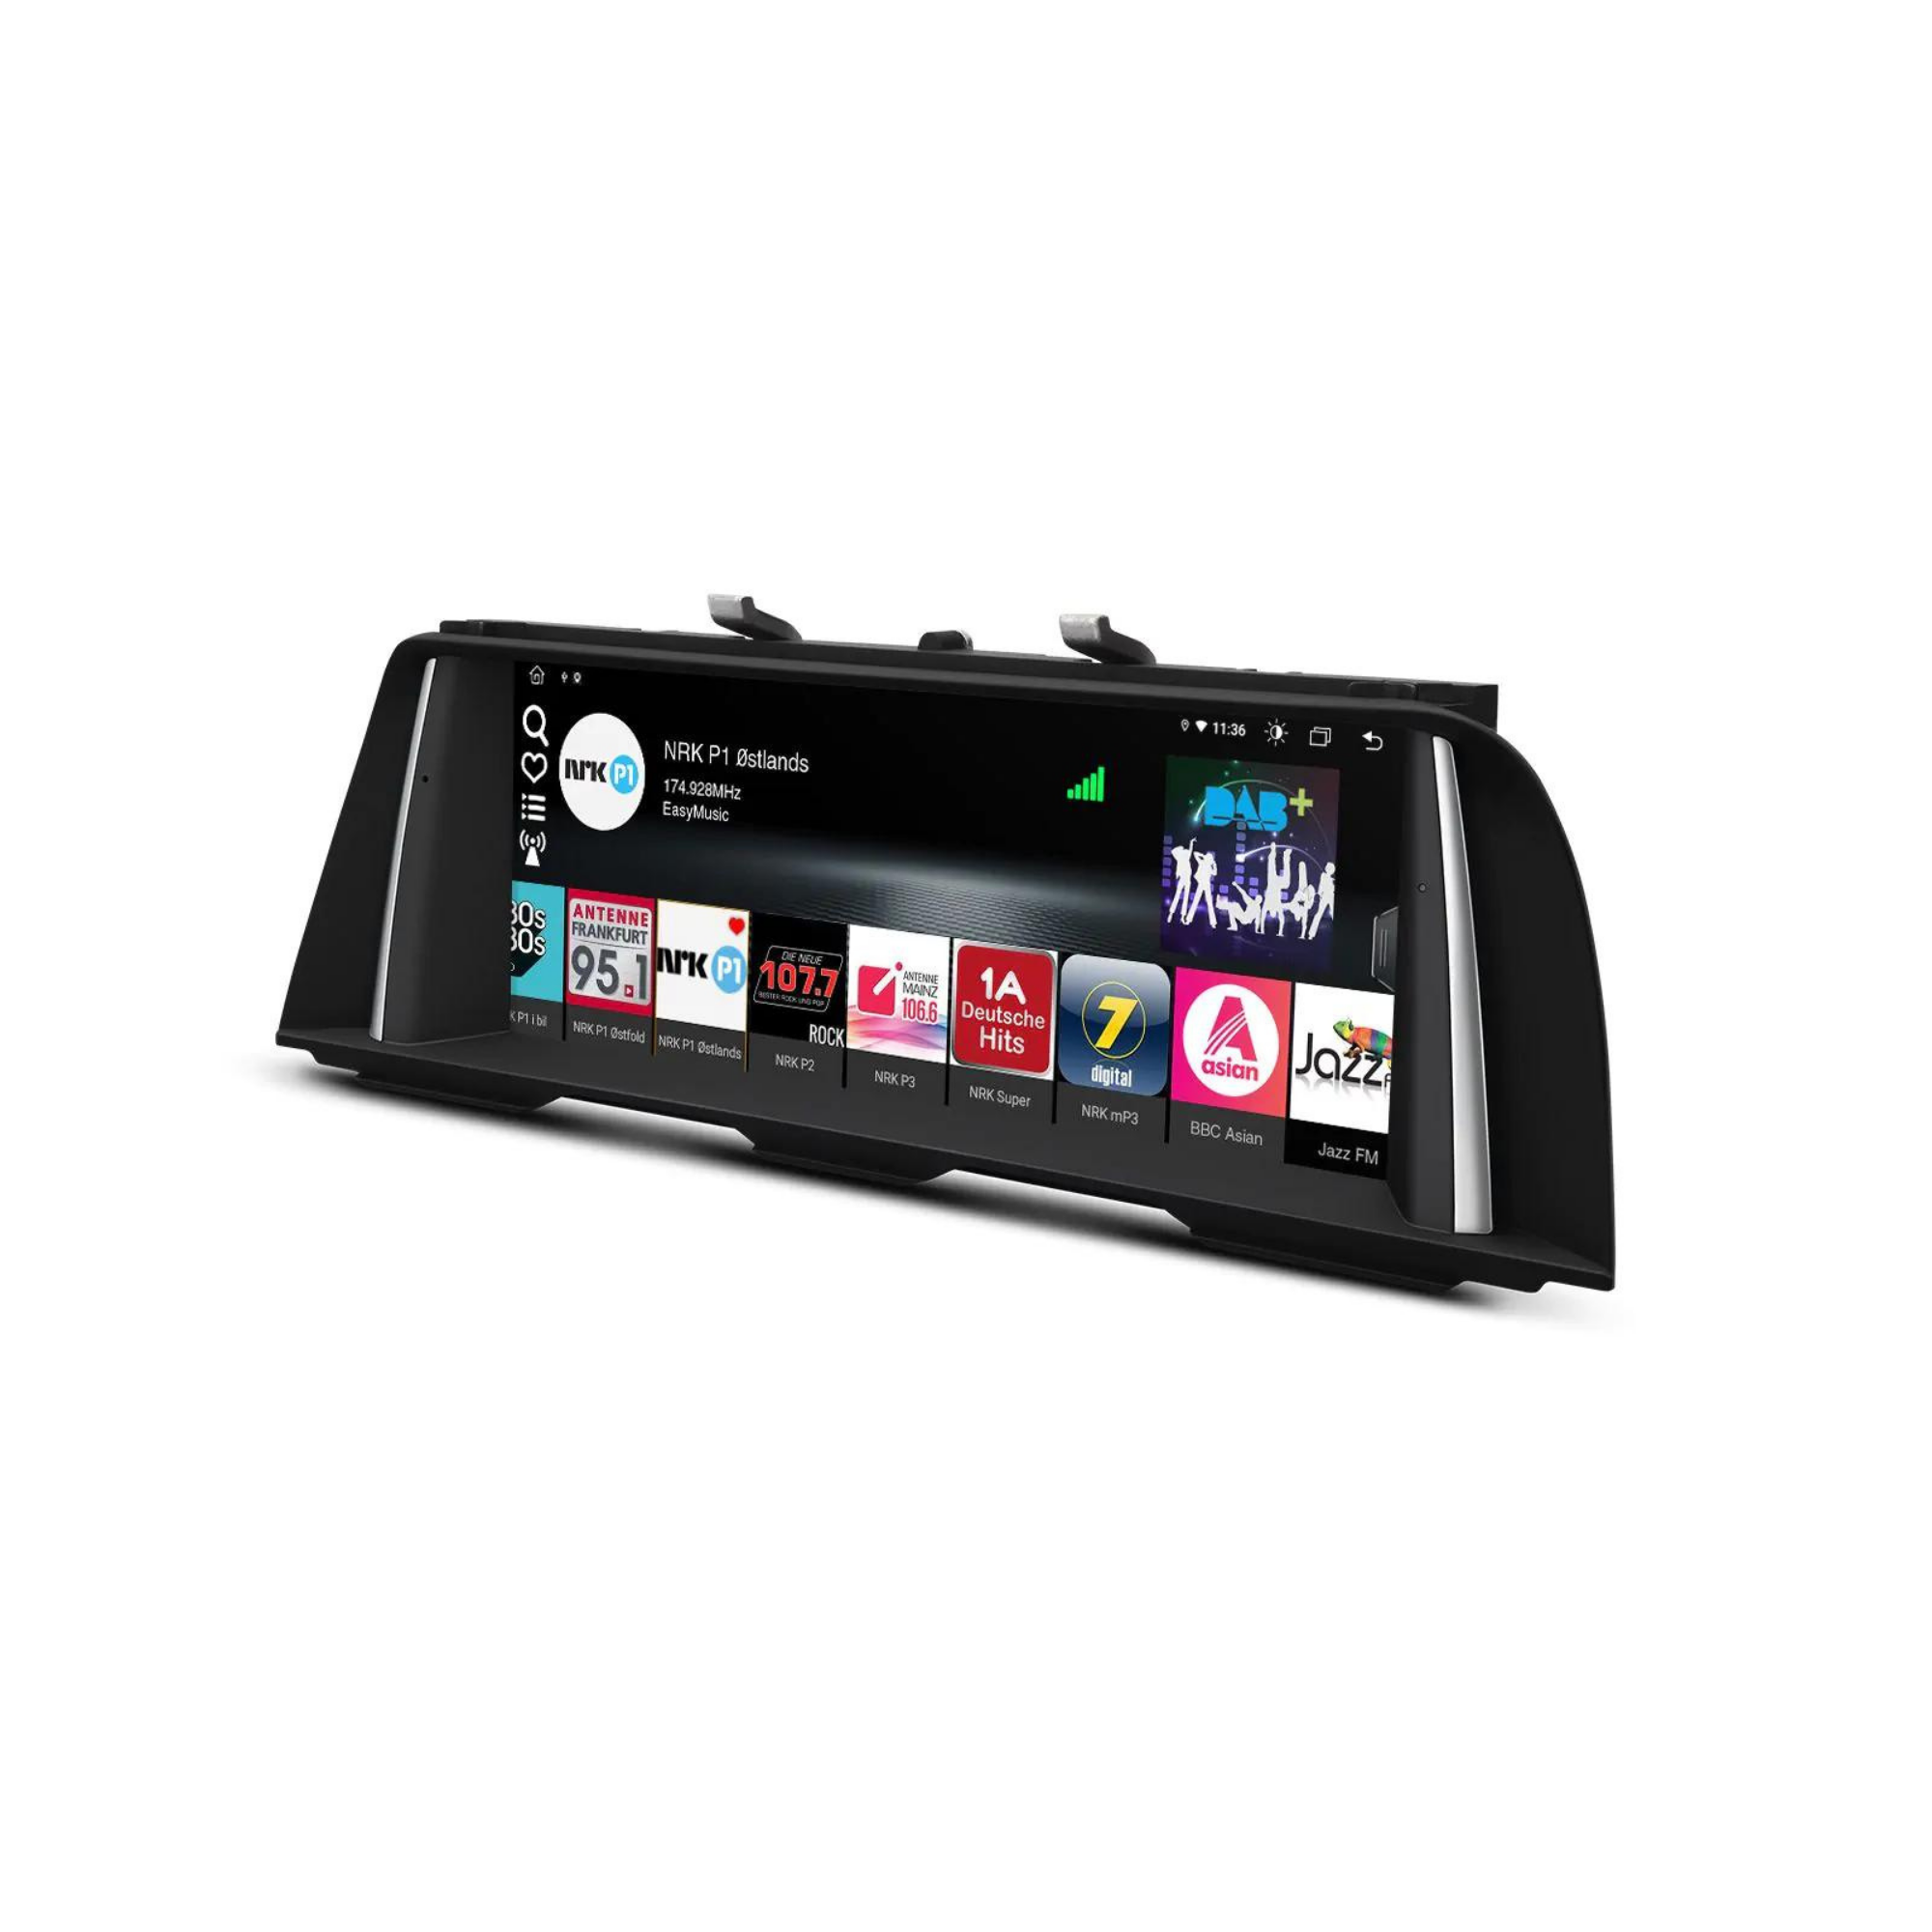 Direct fit for BMW 5 Series (2010-2012 CIC) F10, 10.25 Inch HD Android 12 Touchscreen display with built in Apple CarPlay & Android Auto